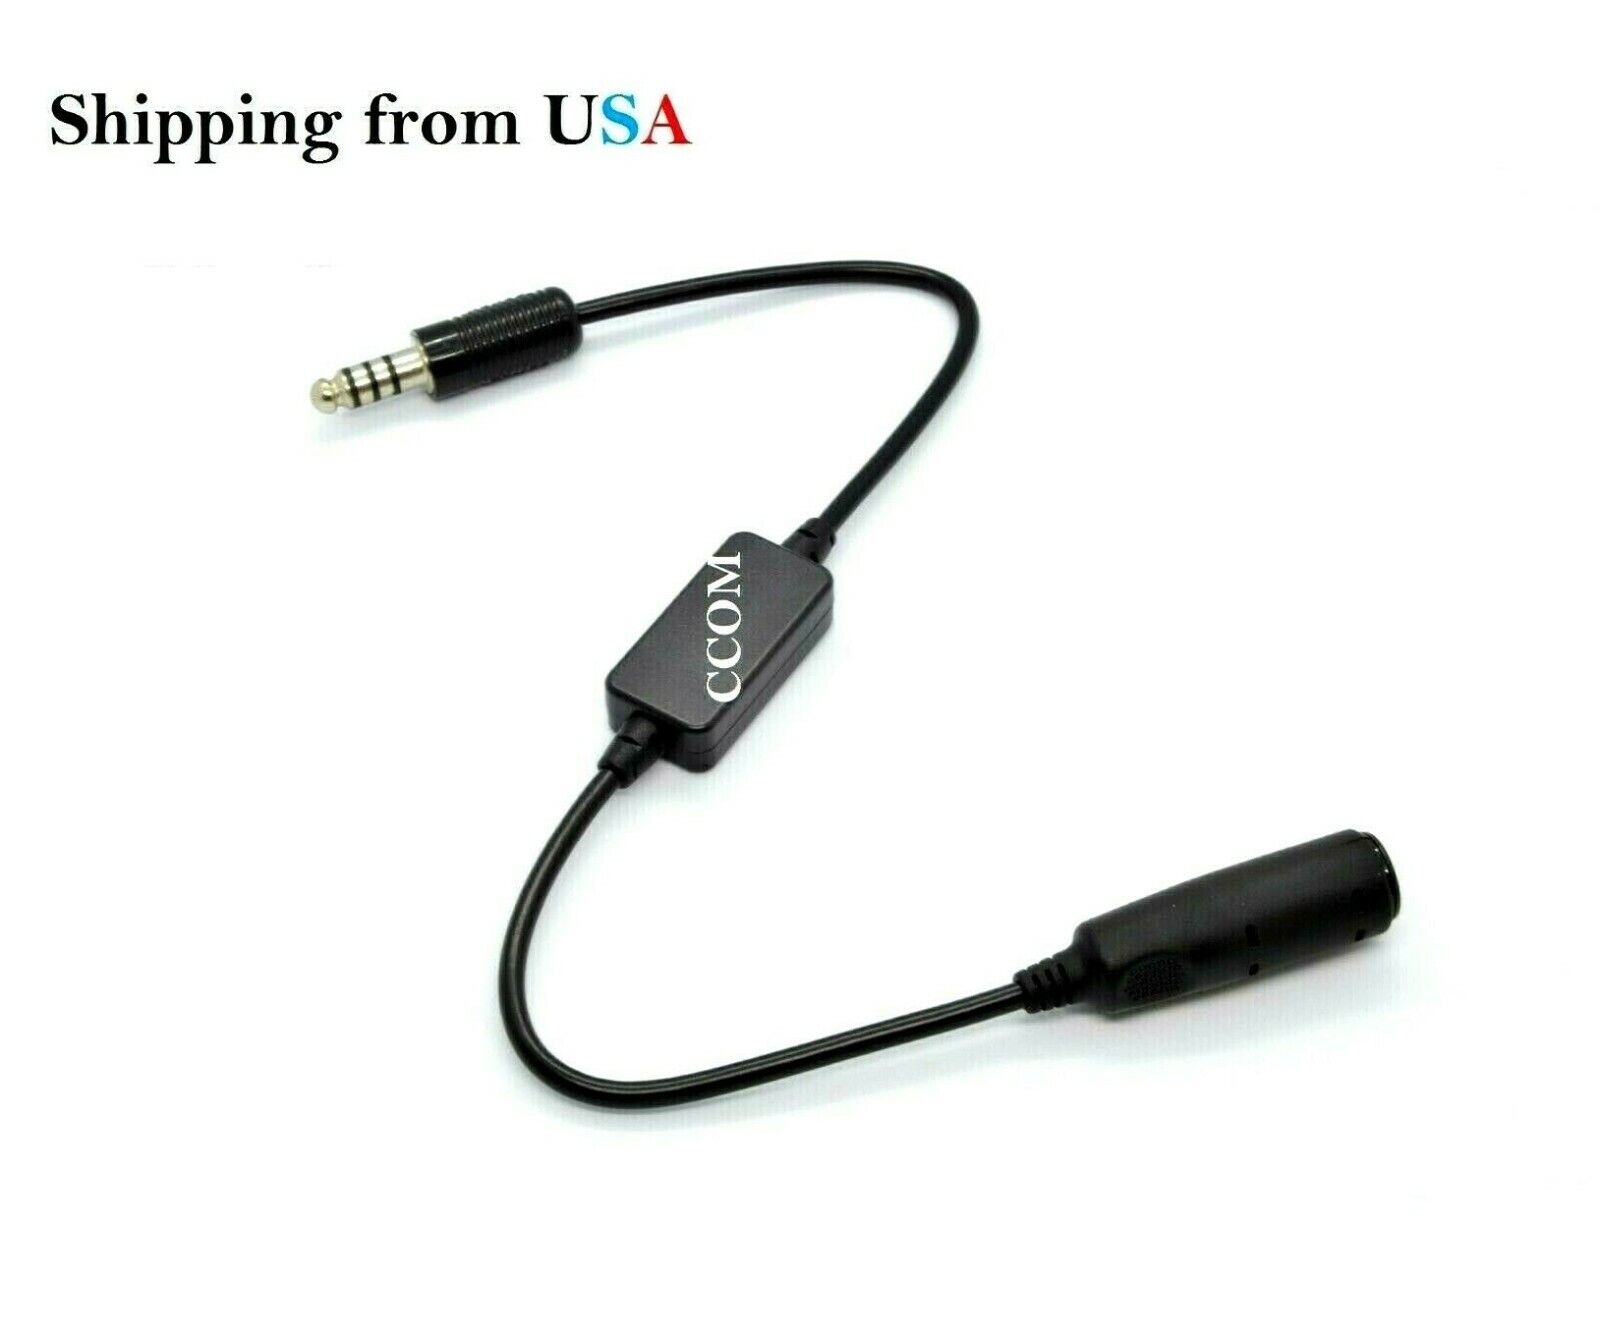 LOW TO HIGH IMPEDANCE CONVERTER/ MIL TO CIVILIAN HEADSET ADAPTER FOR HELICOPTER